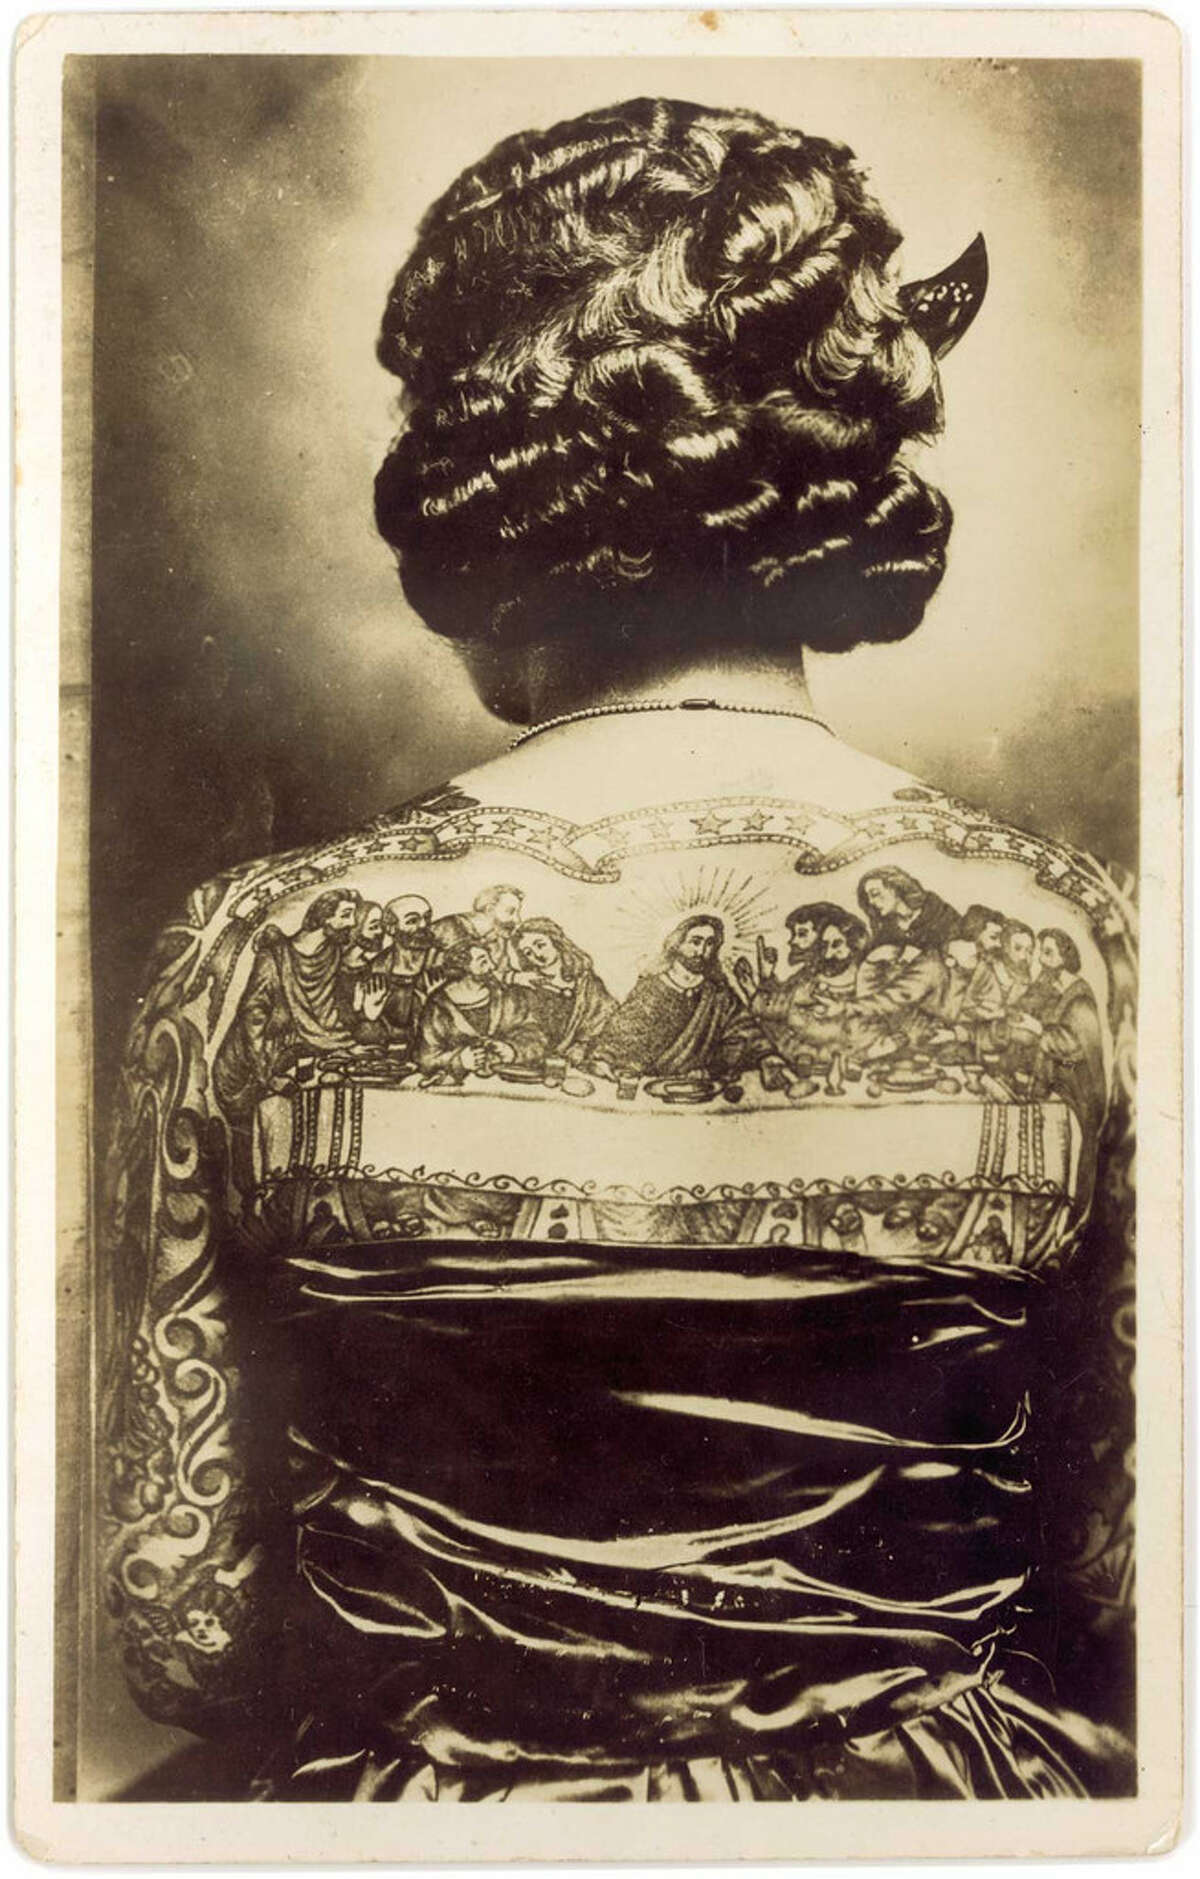 "Tattooed Lady" by an unknown photographer﻿, is among limited-edition archival pigment prints on view through May 4 in "Camera Era: Freeze Frames From a World Long Gone."﻿